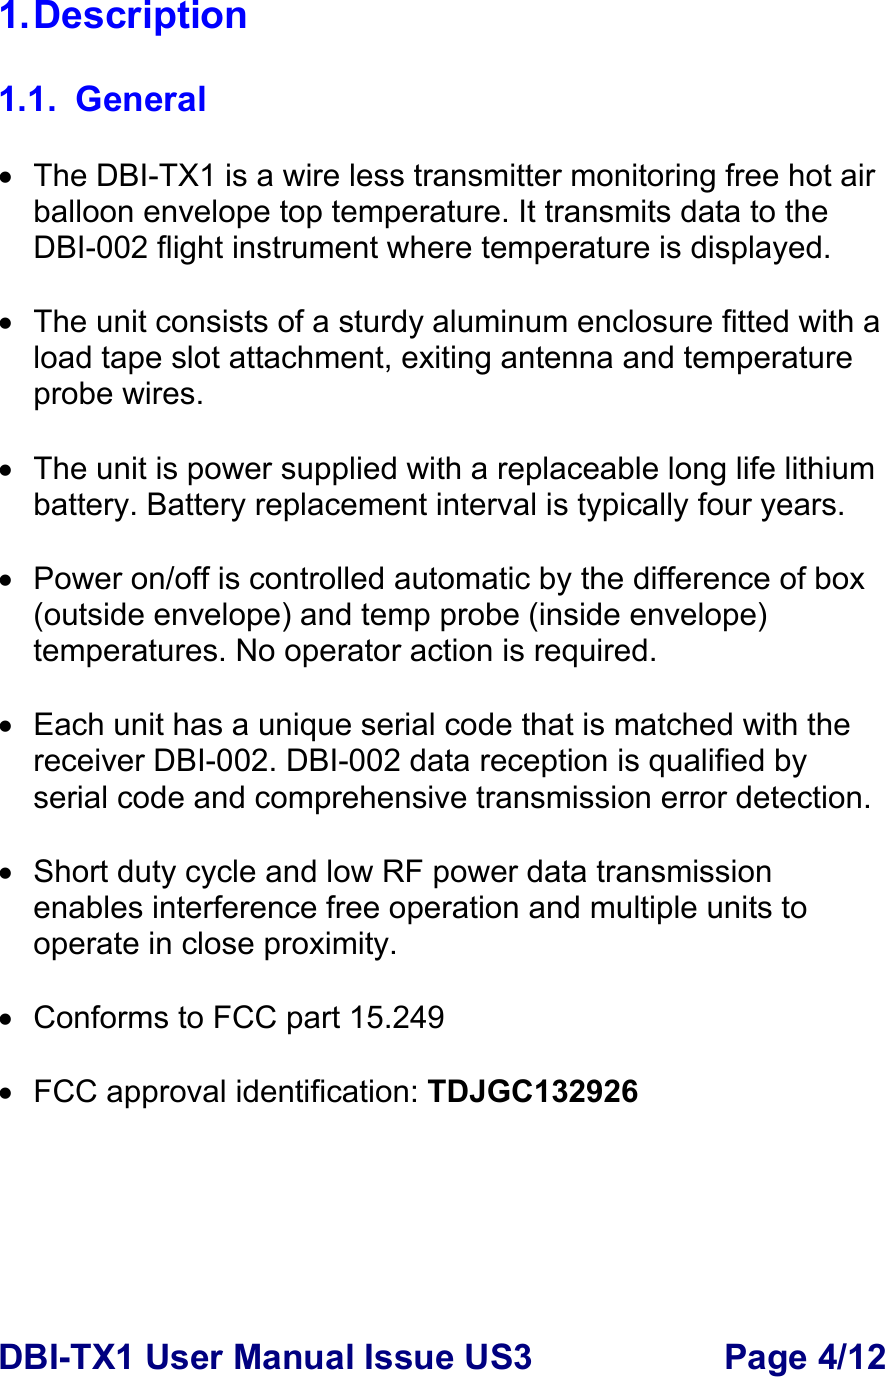 DBI-TX1 User Manual Issue US3  Page 4/12 1. Description  1.1. General  •  The DBI-TX1 is a wire less transmitter monitoring free hot air balloon envelope top temperature. It transmits data to the DBI-002 flight instrument where temperature is displayed.  •  The unit consists of a sturdy aluminum enclosure fitted with a load tape slot attachment, exiting antenna and temperature probe wires.   •  The unit is power supplied with a replaceable long life lithium battery. Battery replacement interval is typically four years.  •  Power on/off is controlled automatic by the difference of box (outside envelope) and temp probe (inside envelope) temperatures. No operator action is required.    •  Each unit has a unique serial code that is matched with the receiver DBI-002. DBI-002 data reception is qualified by serial code and comprehensive transmission error detection.      •  Short duty cycle and low RF power data transmission enables interference free operation and multiple units to operate in close proximity.   •  Conforms to FCC part 15.249  •  FCC approval identification: TDJGC132926 